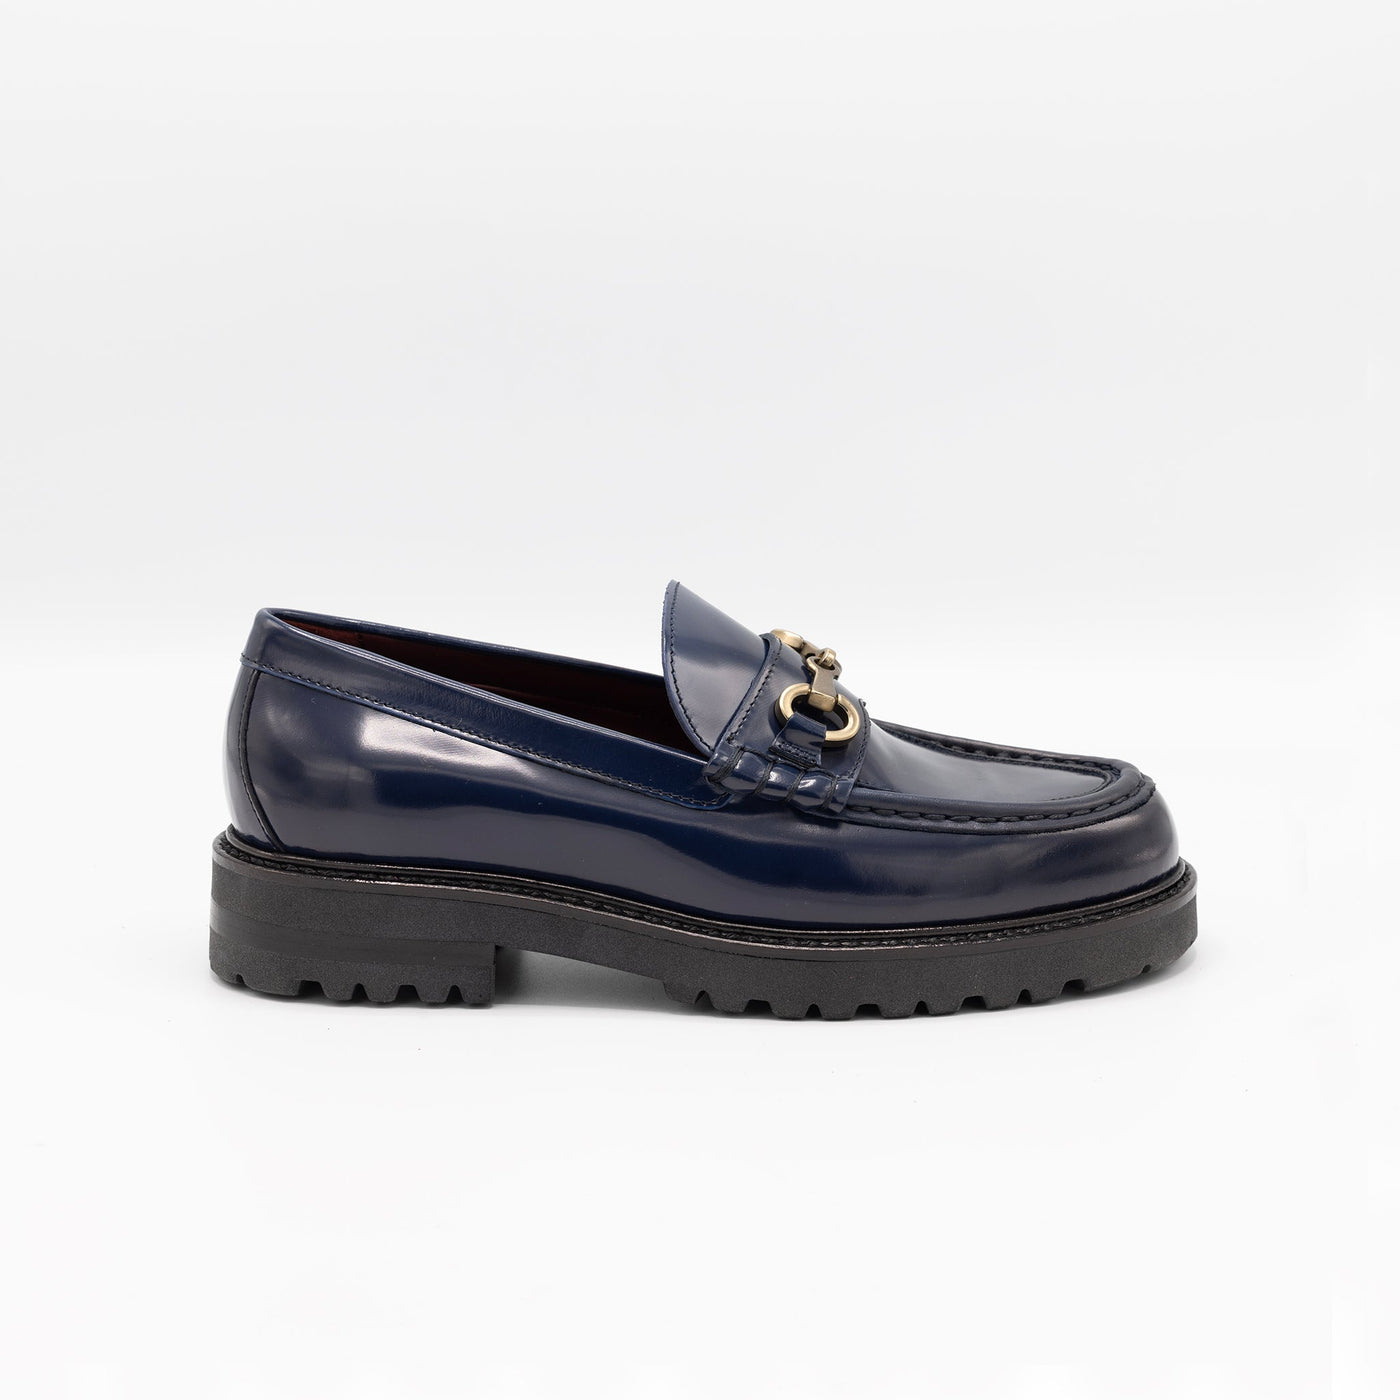 Chunky horsebit loafers in navy